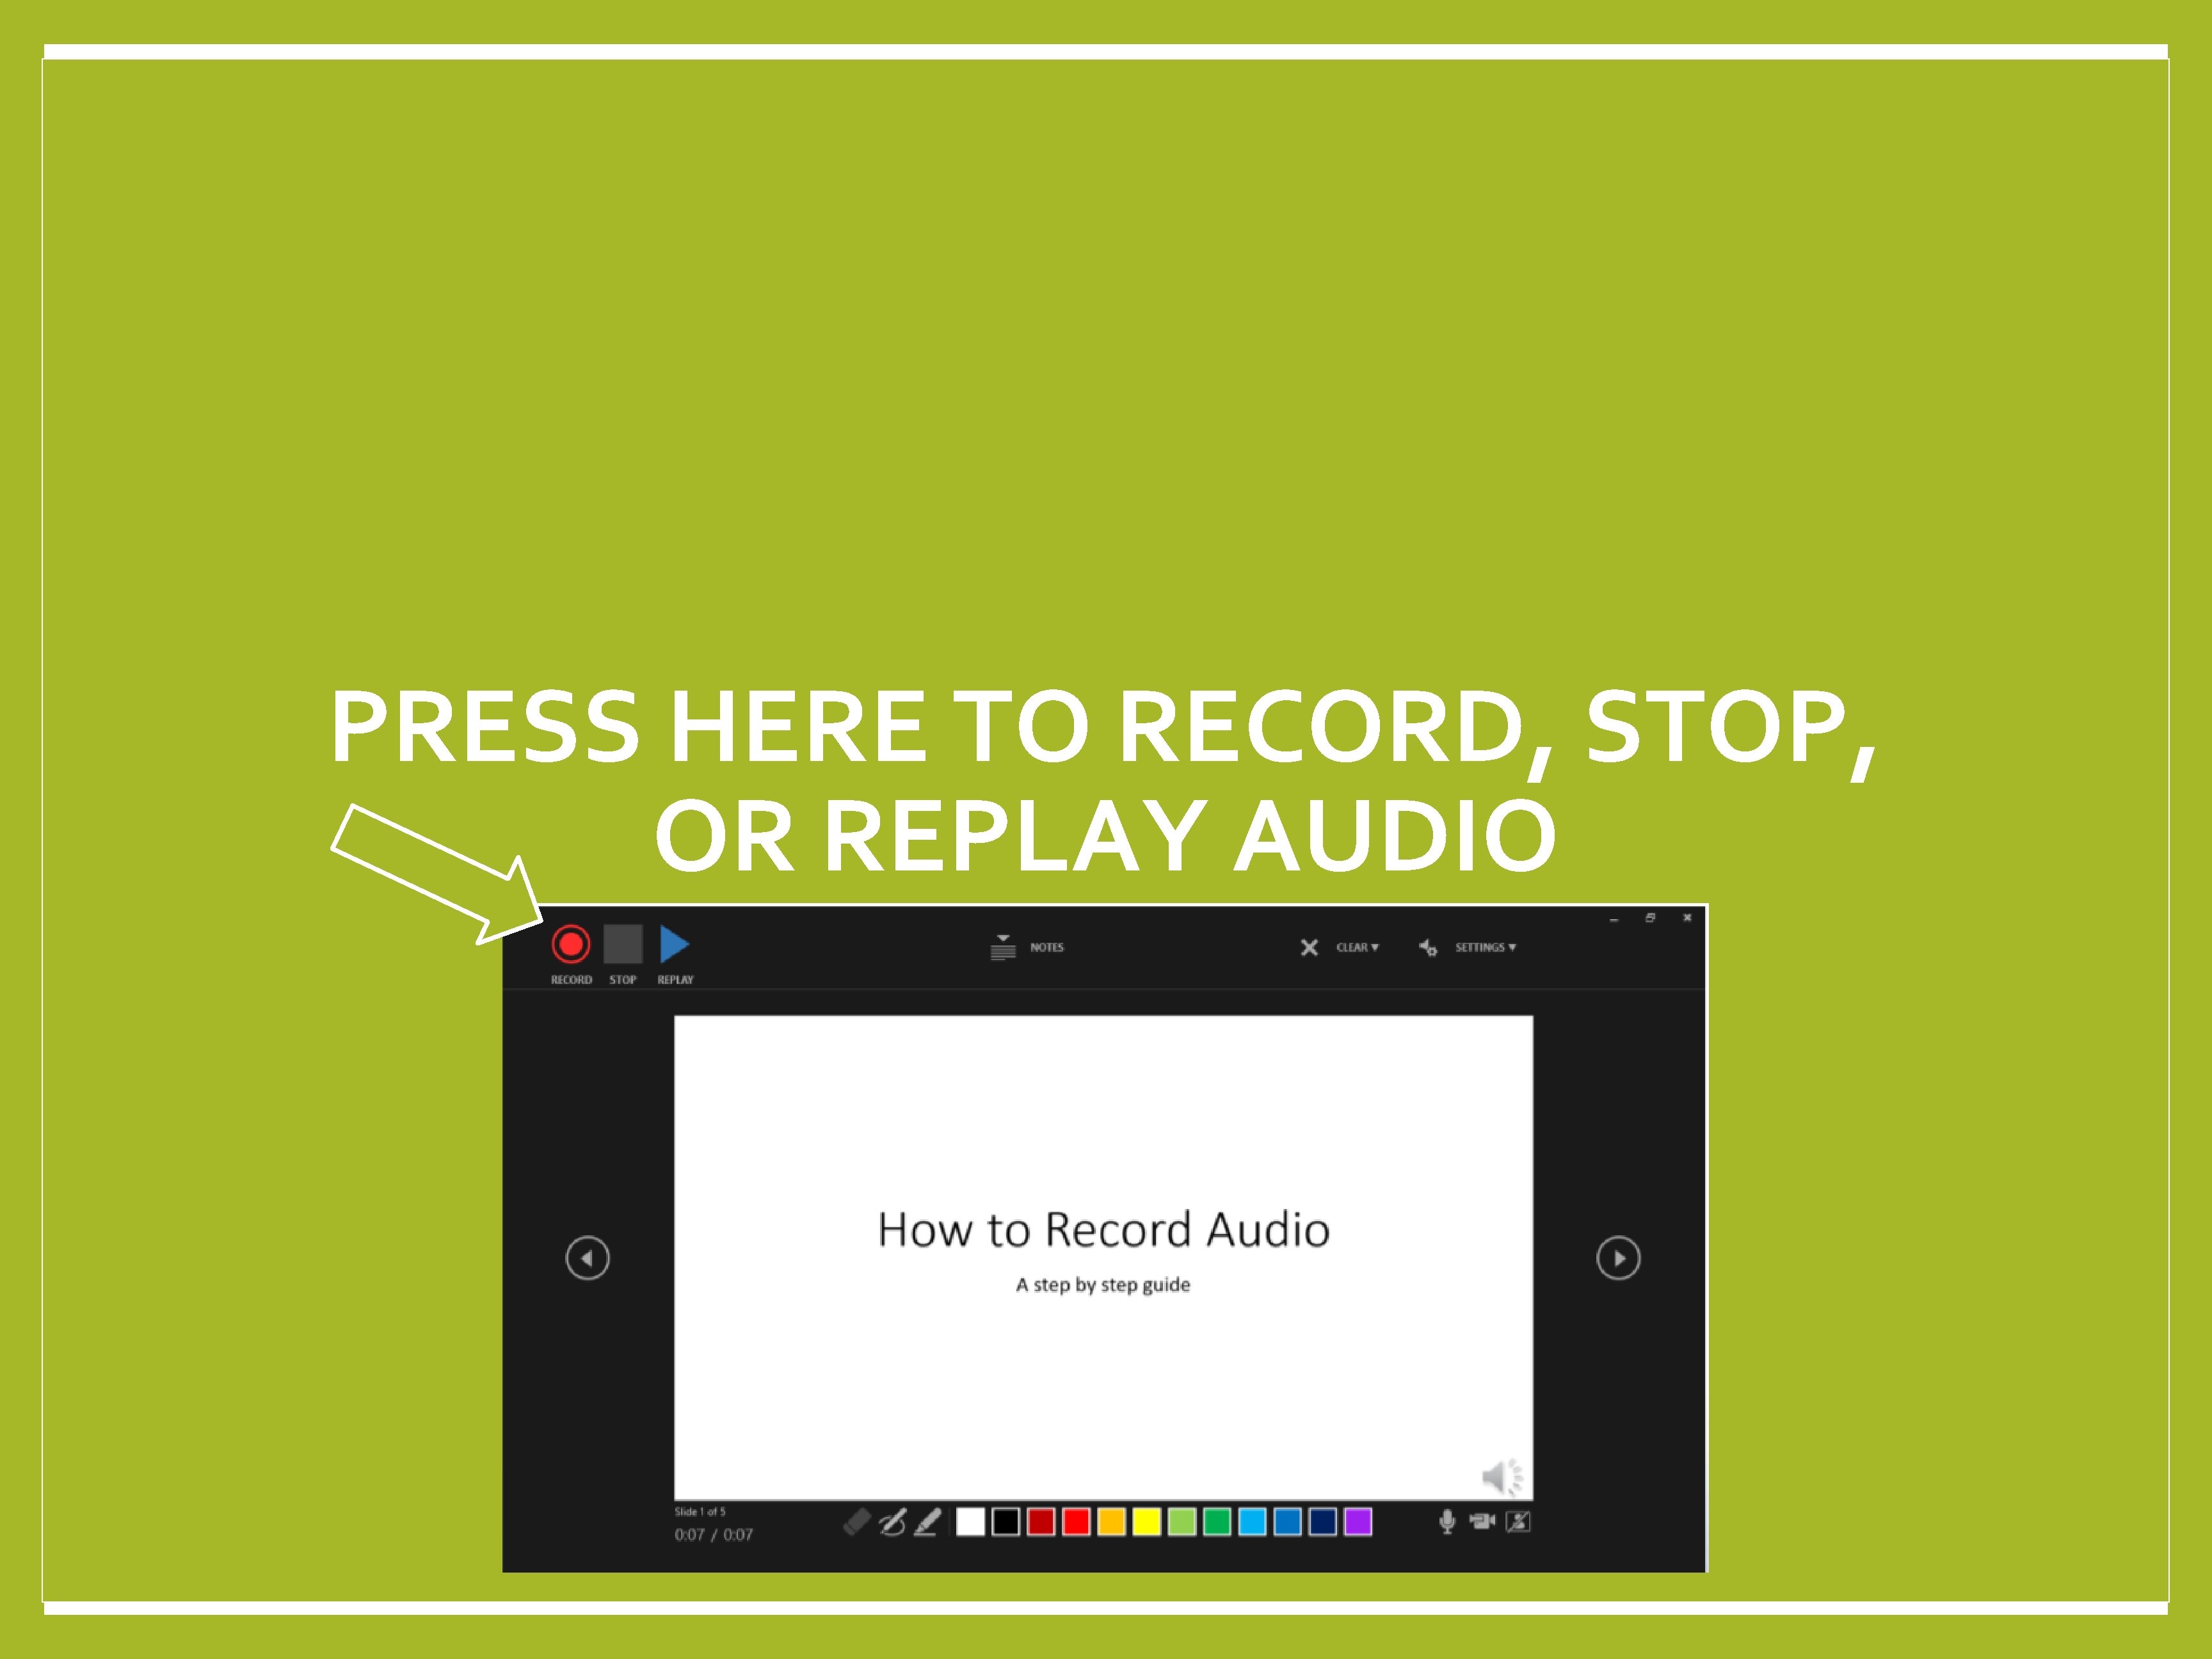 PRESS HERE TO RECORD, STOP, OR REPLAY AUDIO 